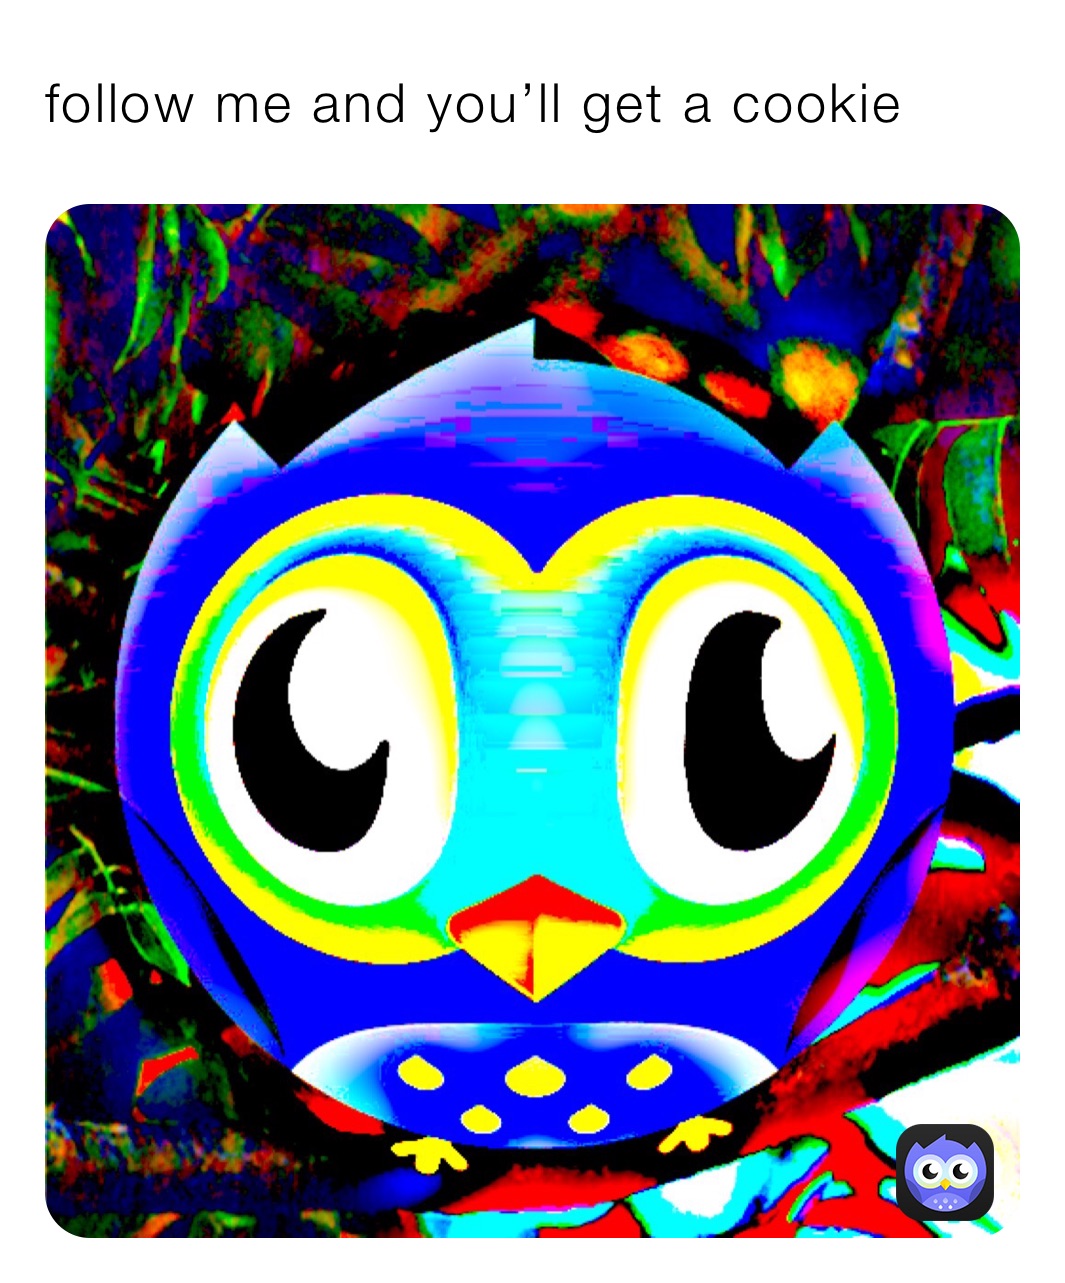 follow me and you’ll get a coockie